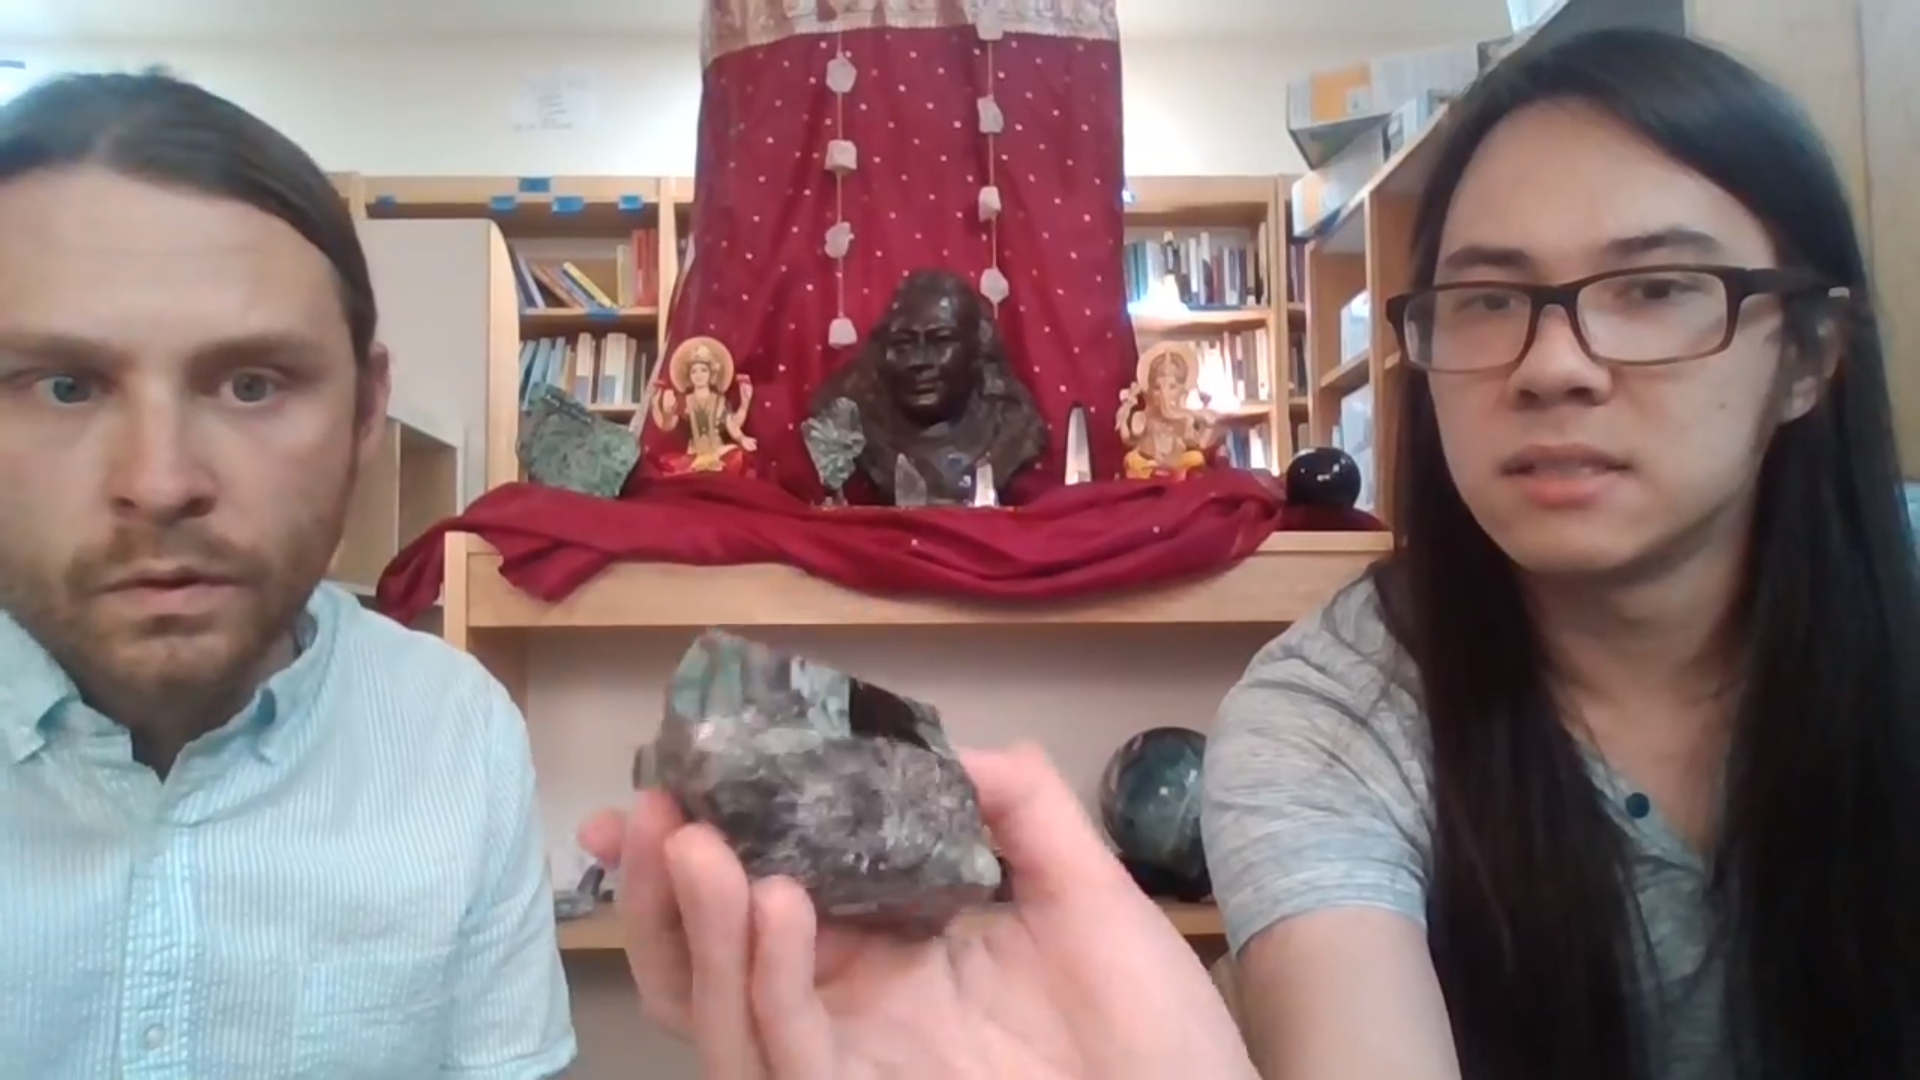 Online Crystal Show Recording from July 10 with Ethan and Bhima